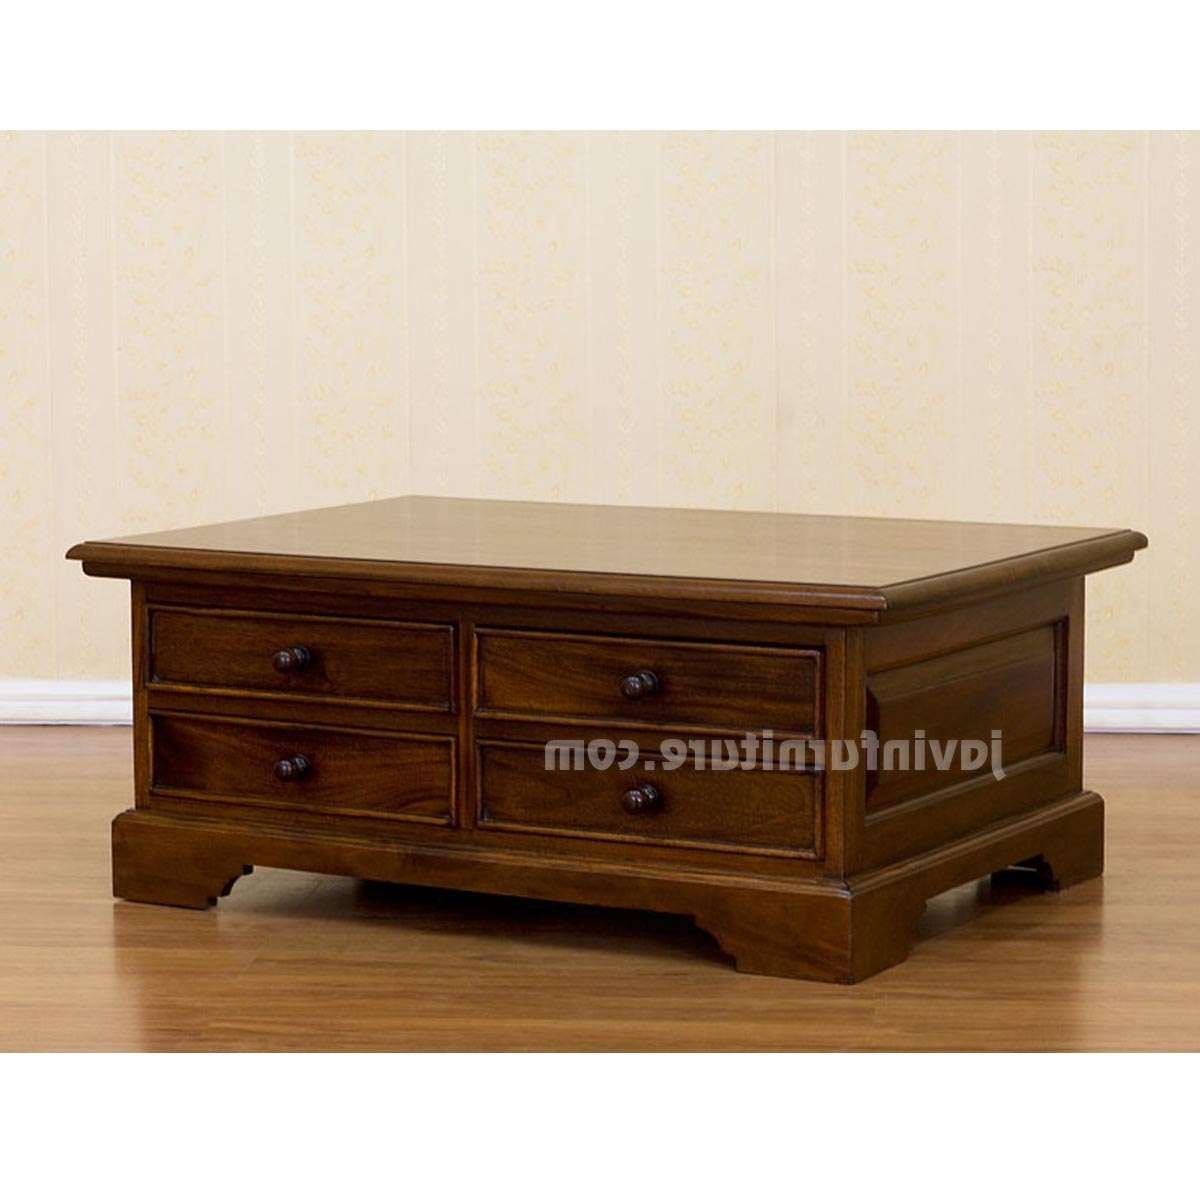 Current Wooden Storage Coffee Tables For Coffee Table, Coffee Table With Storage Coffee Table With Storage (View 11 of 20)